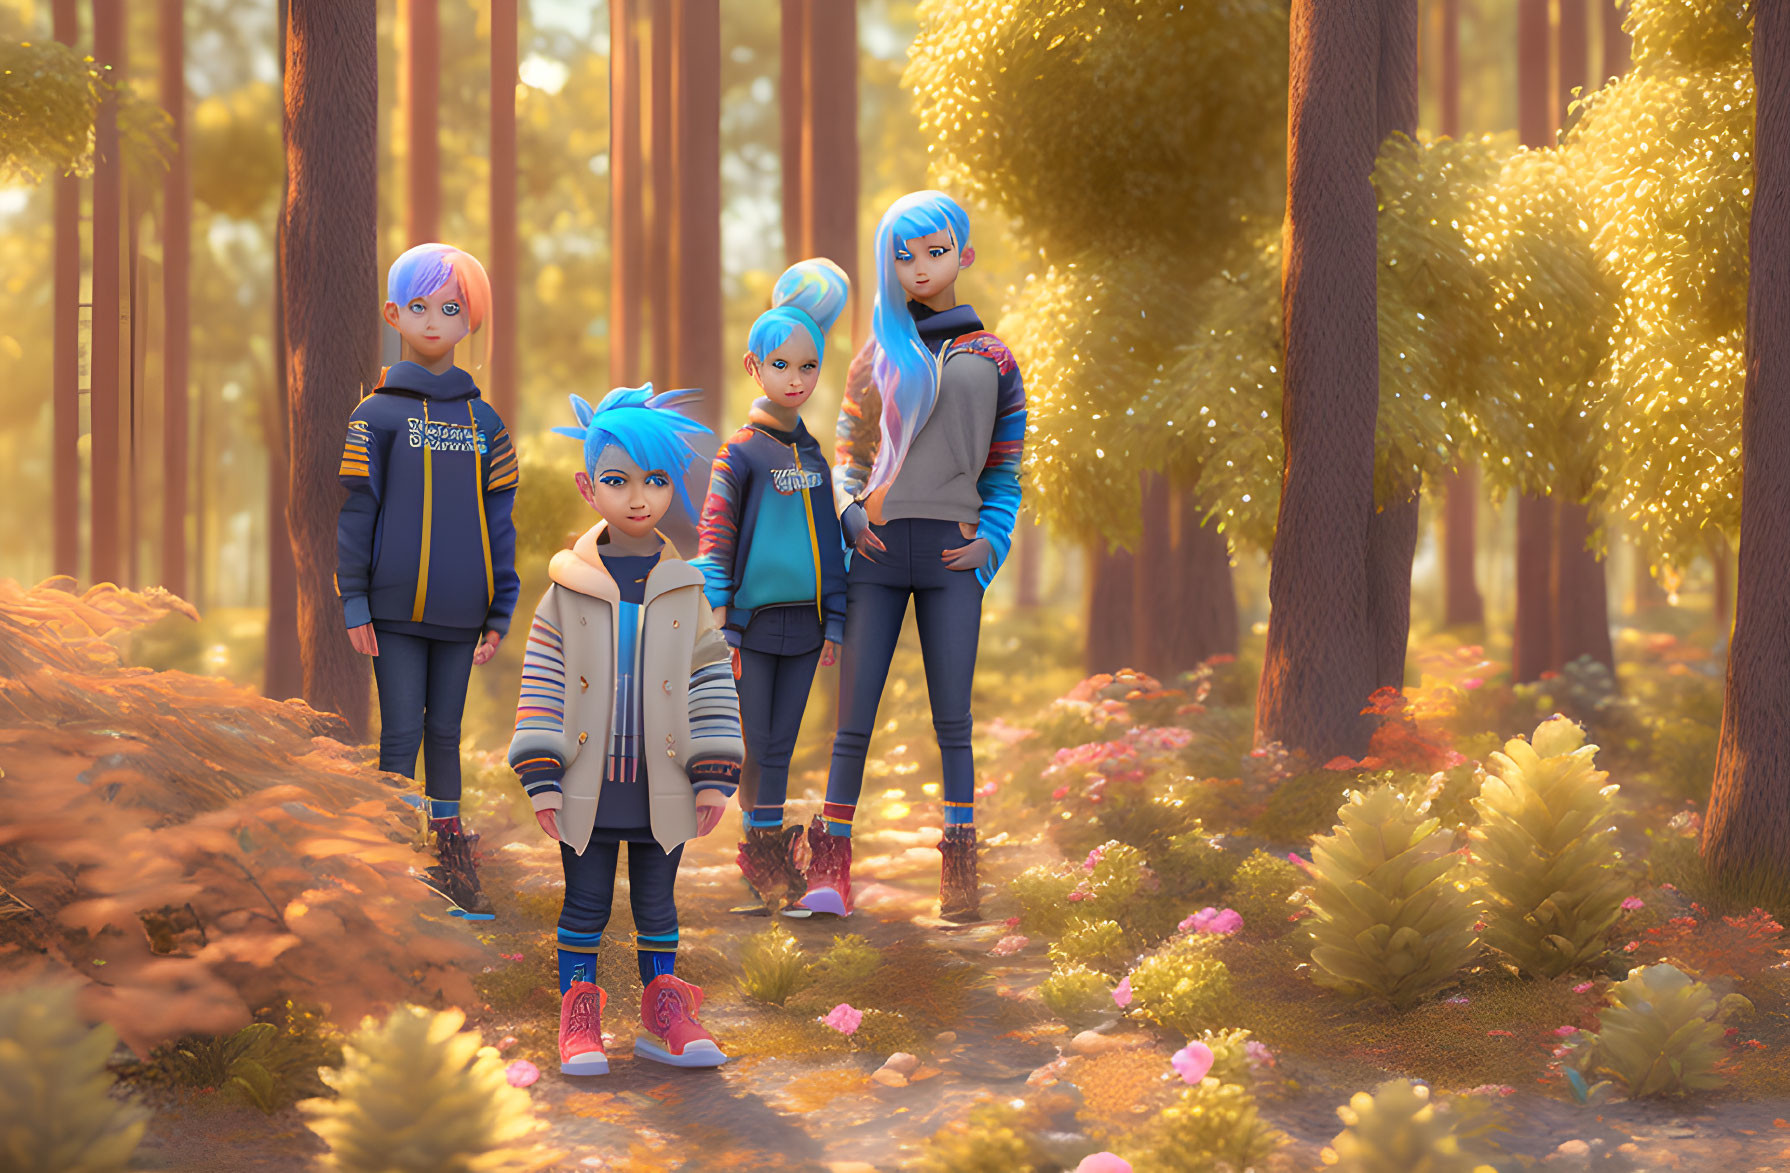 Five animated characters with blue hair in a sunlit forest surrounded by flowers